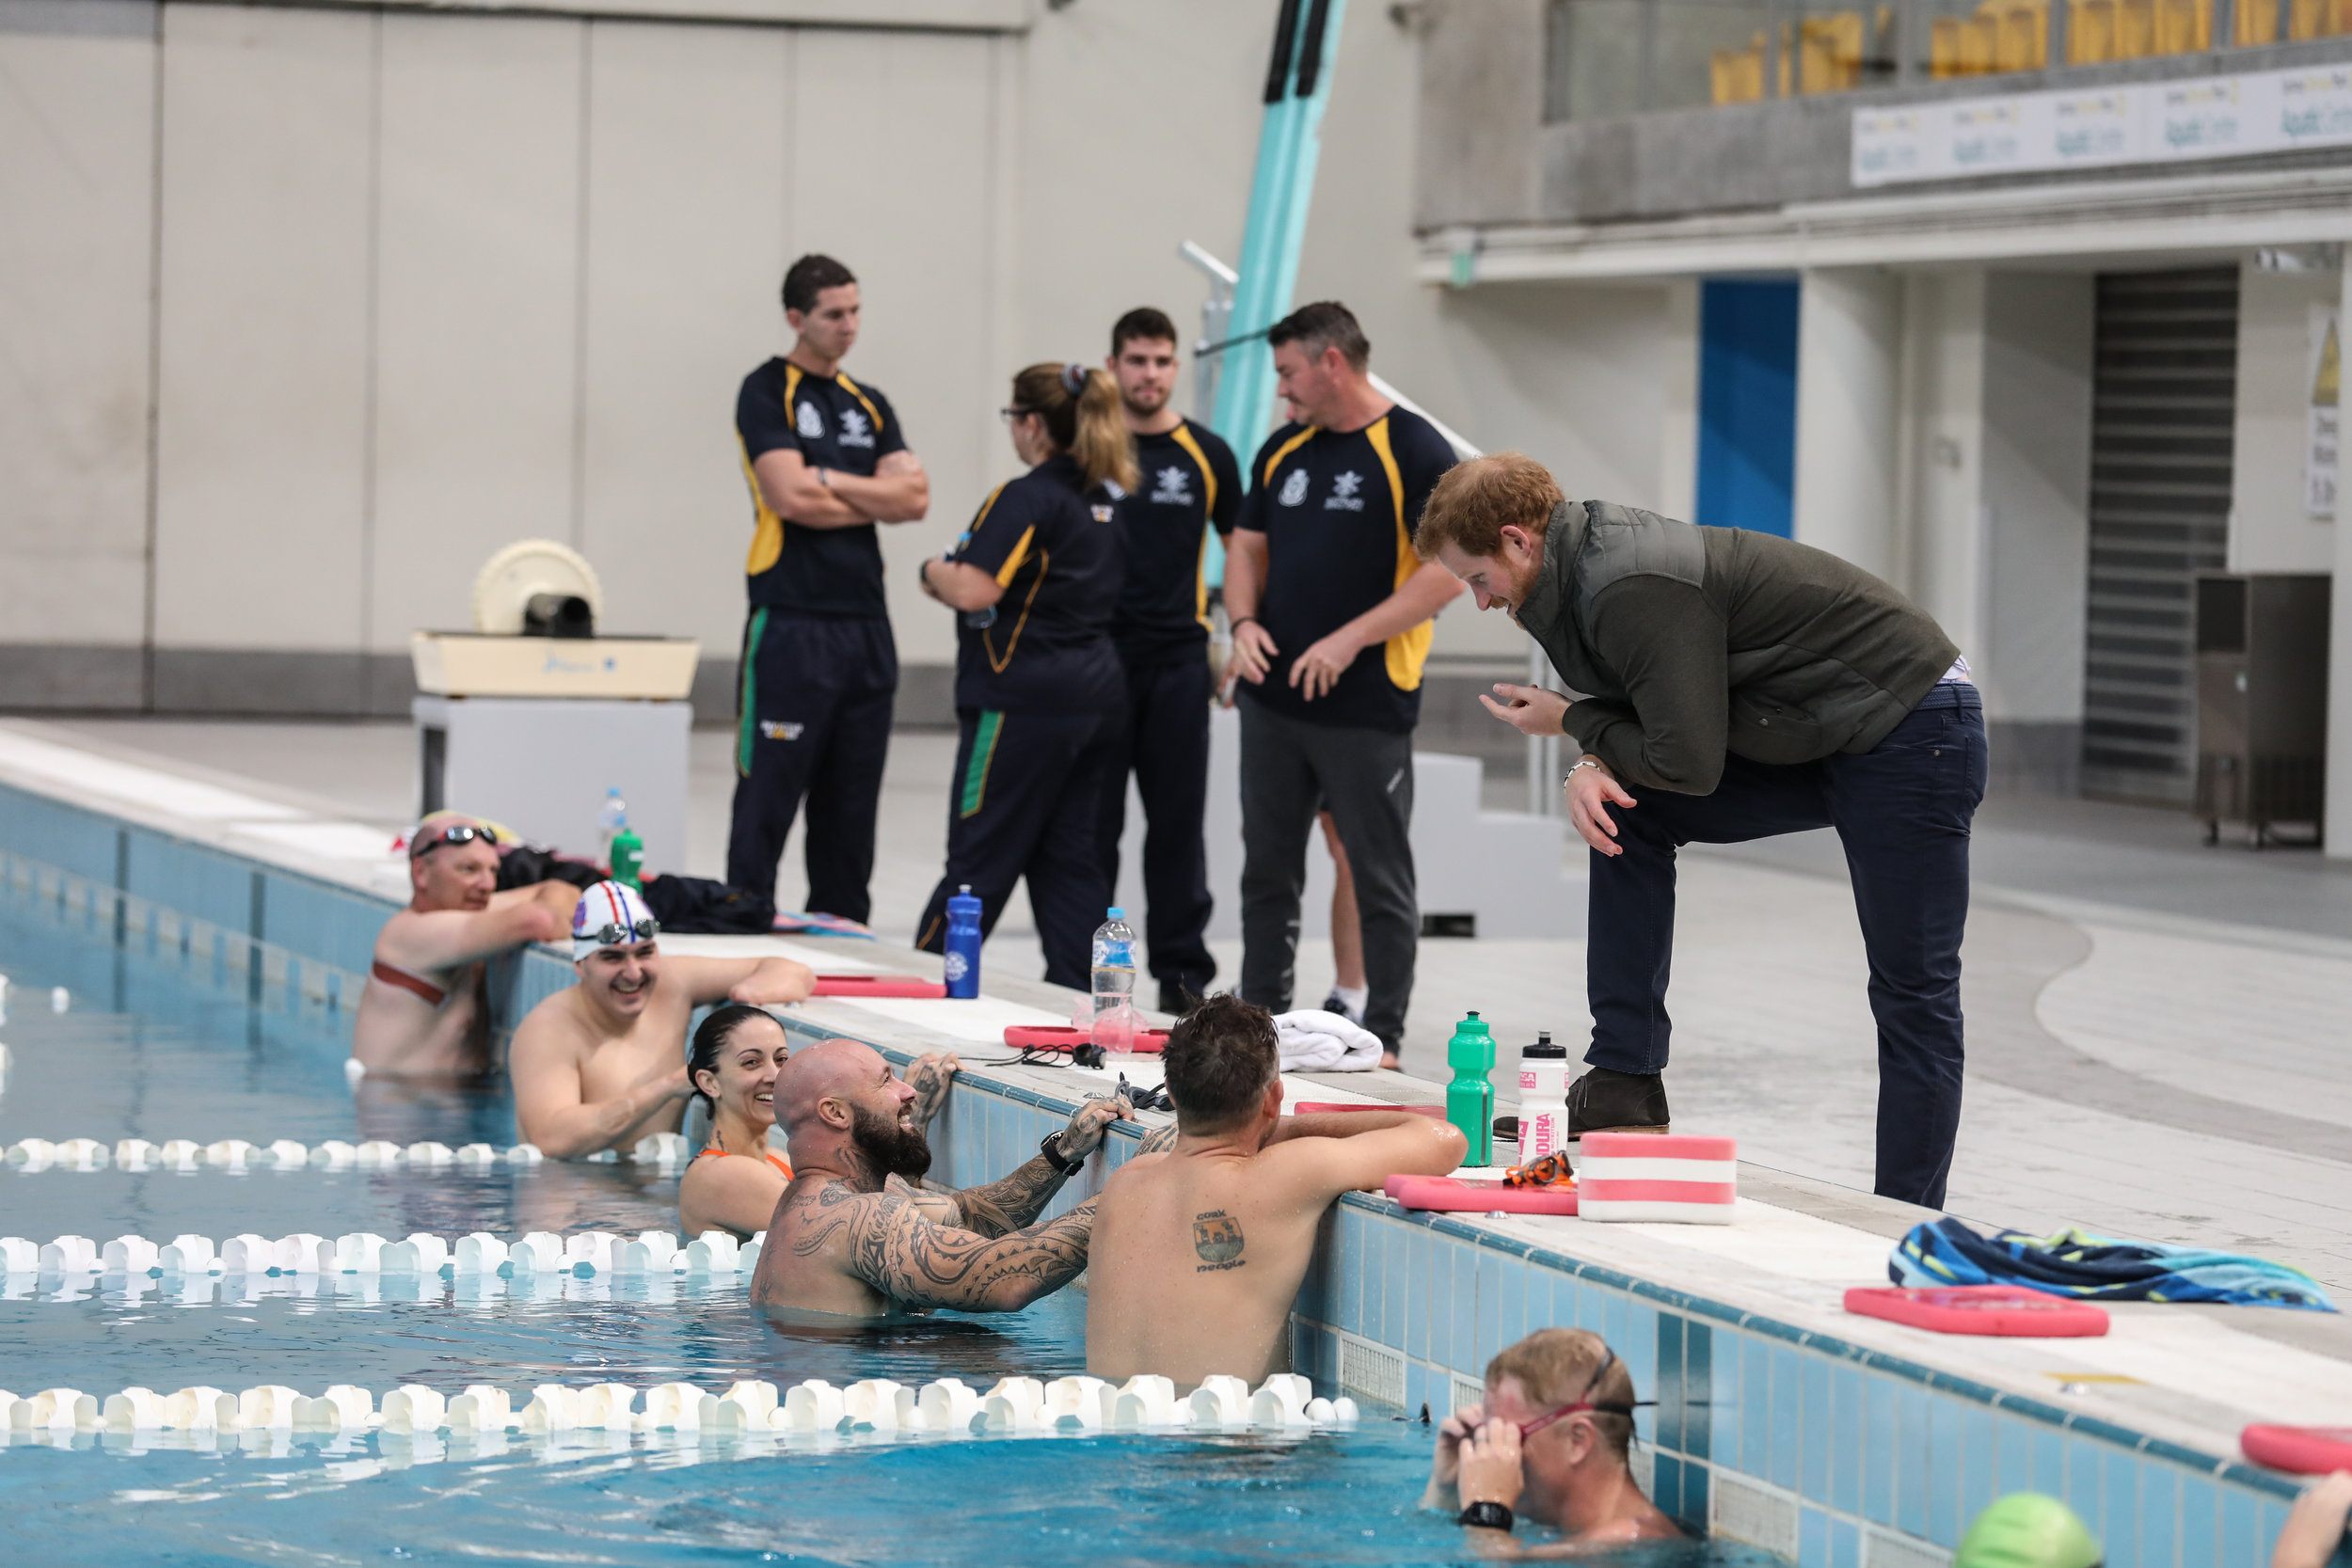   Prince Harry meets with competitors  Image - ABC 